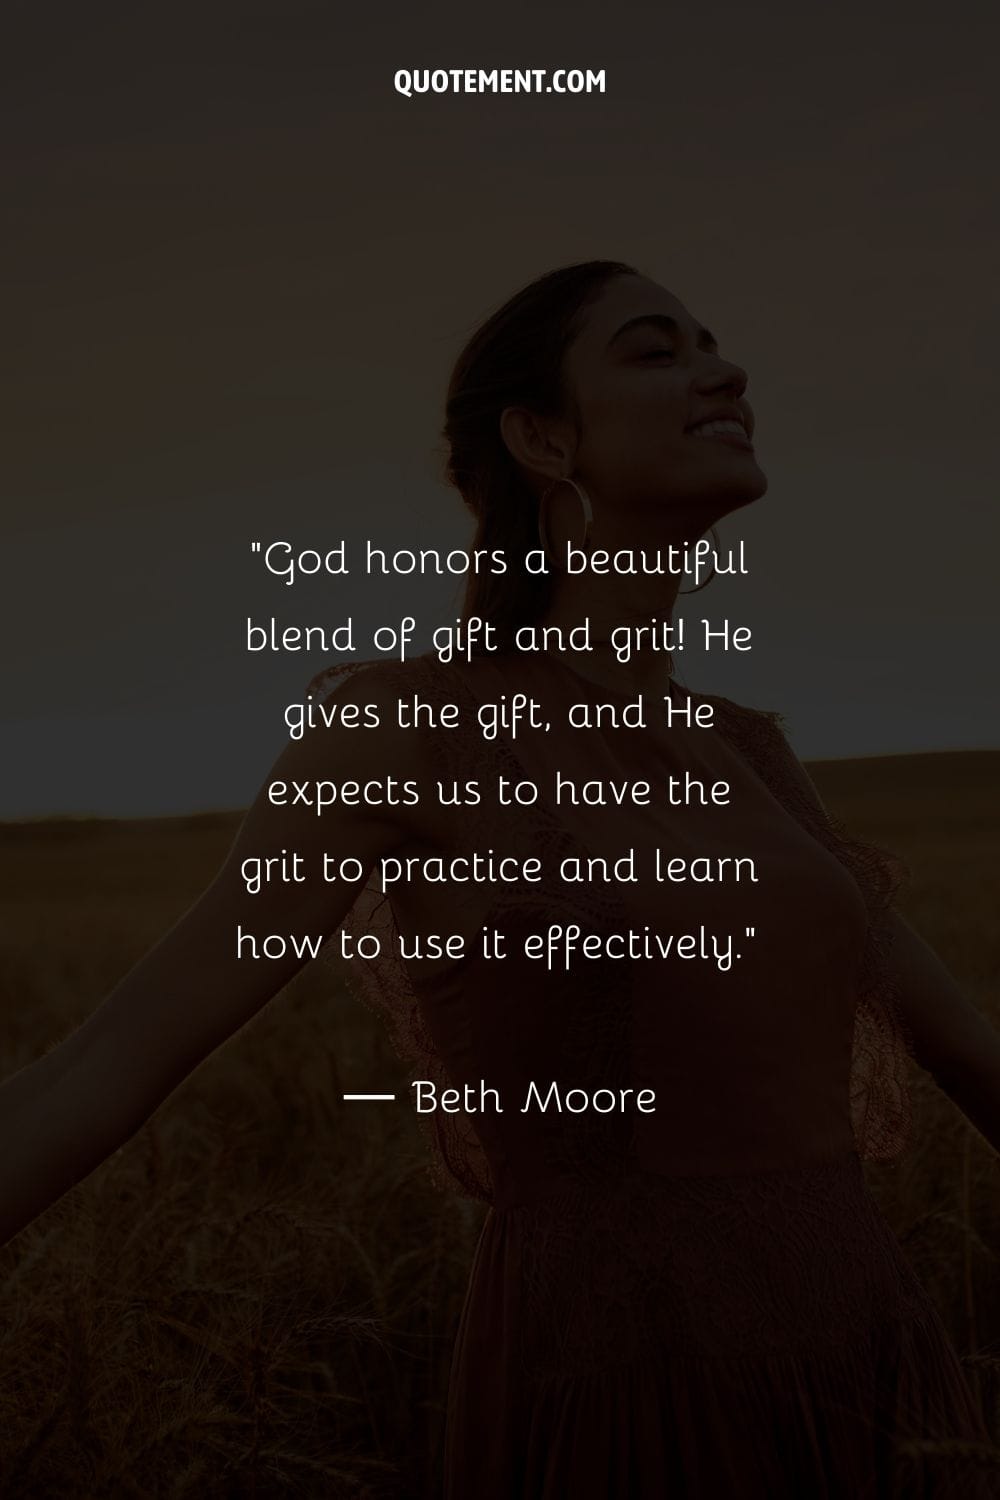 God honors a beautiful blend of gift and grit